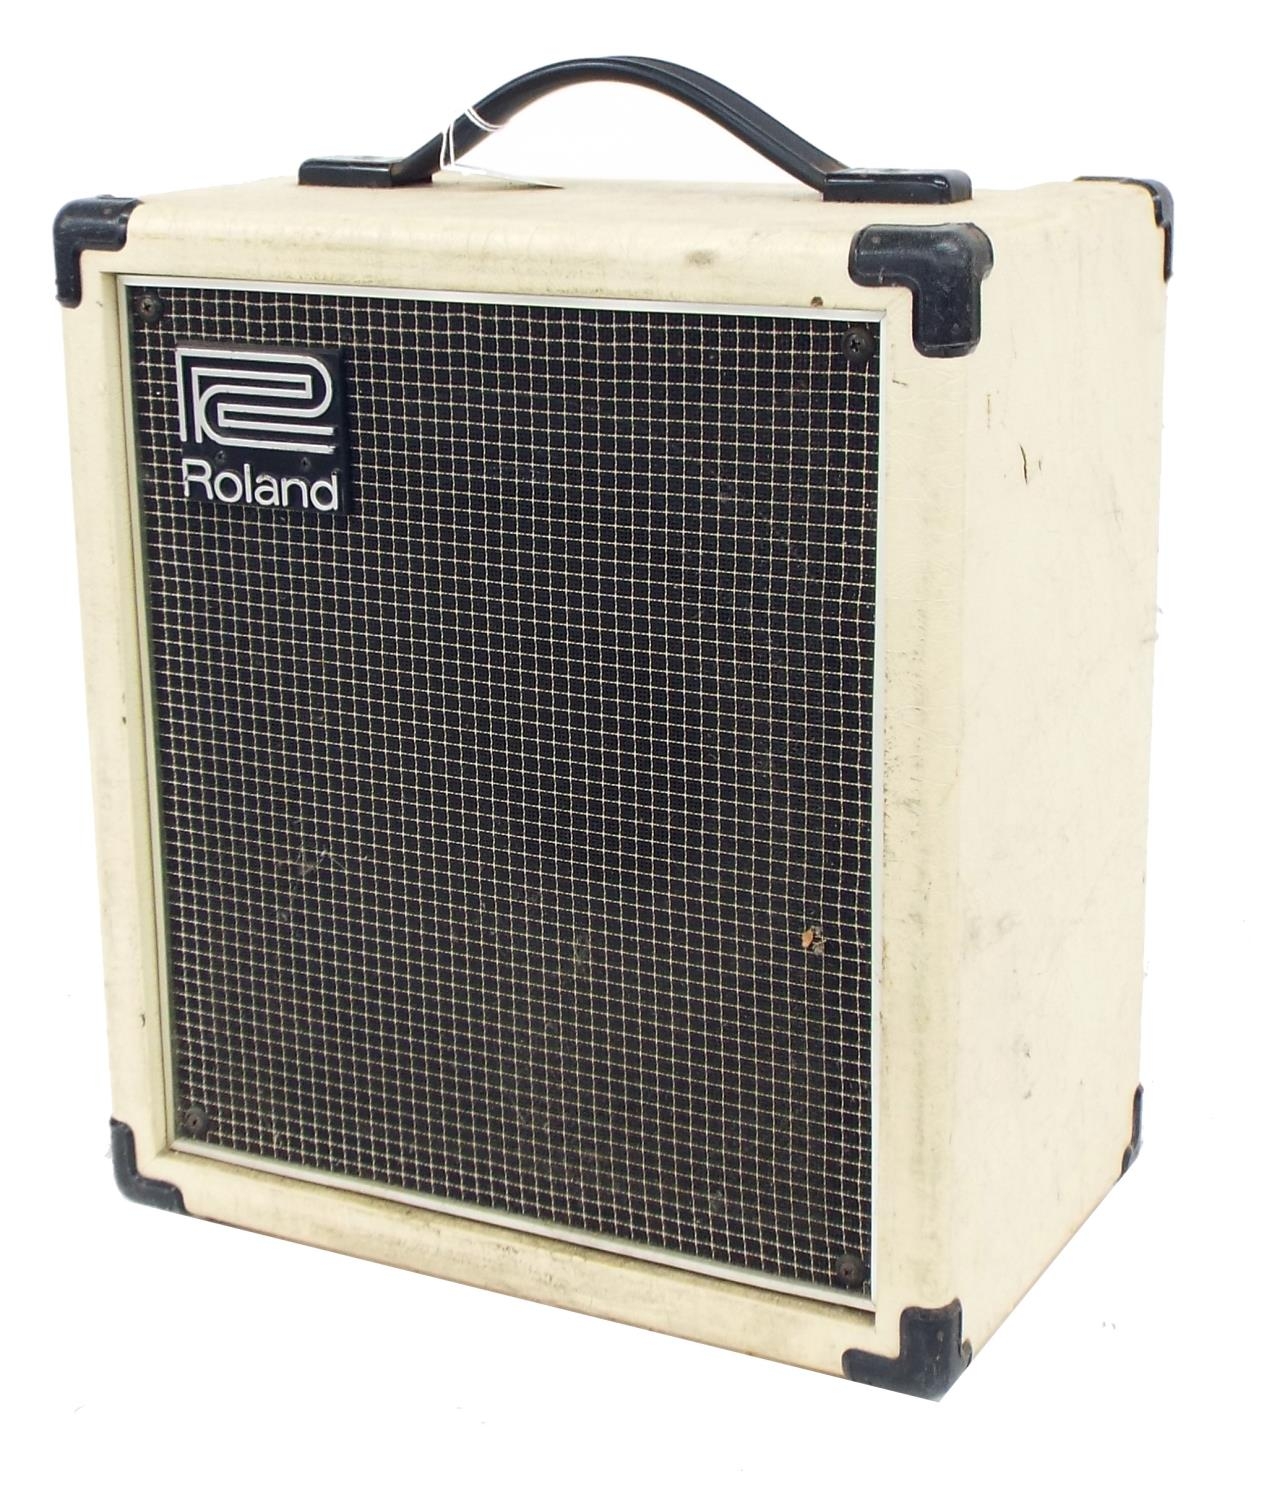 Roland Cube-60 guitar amplifier, made in Japan, ser. no. 081422